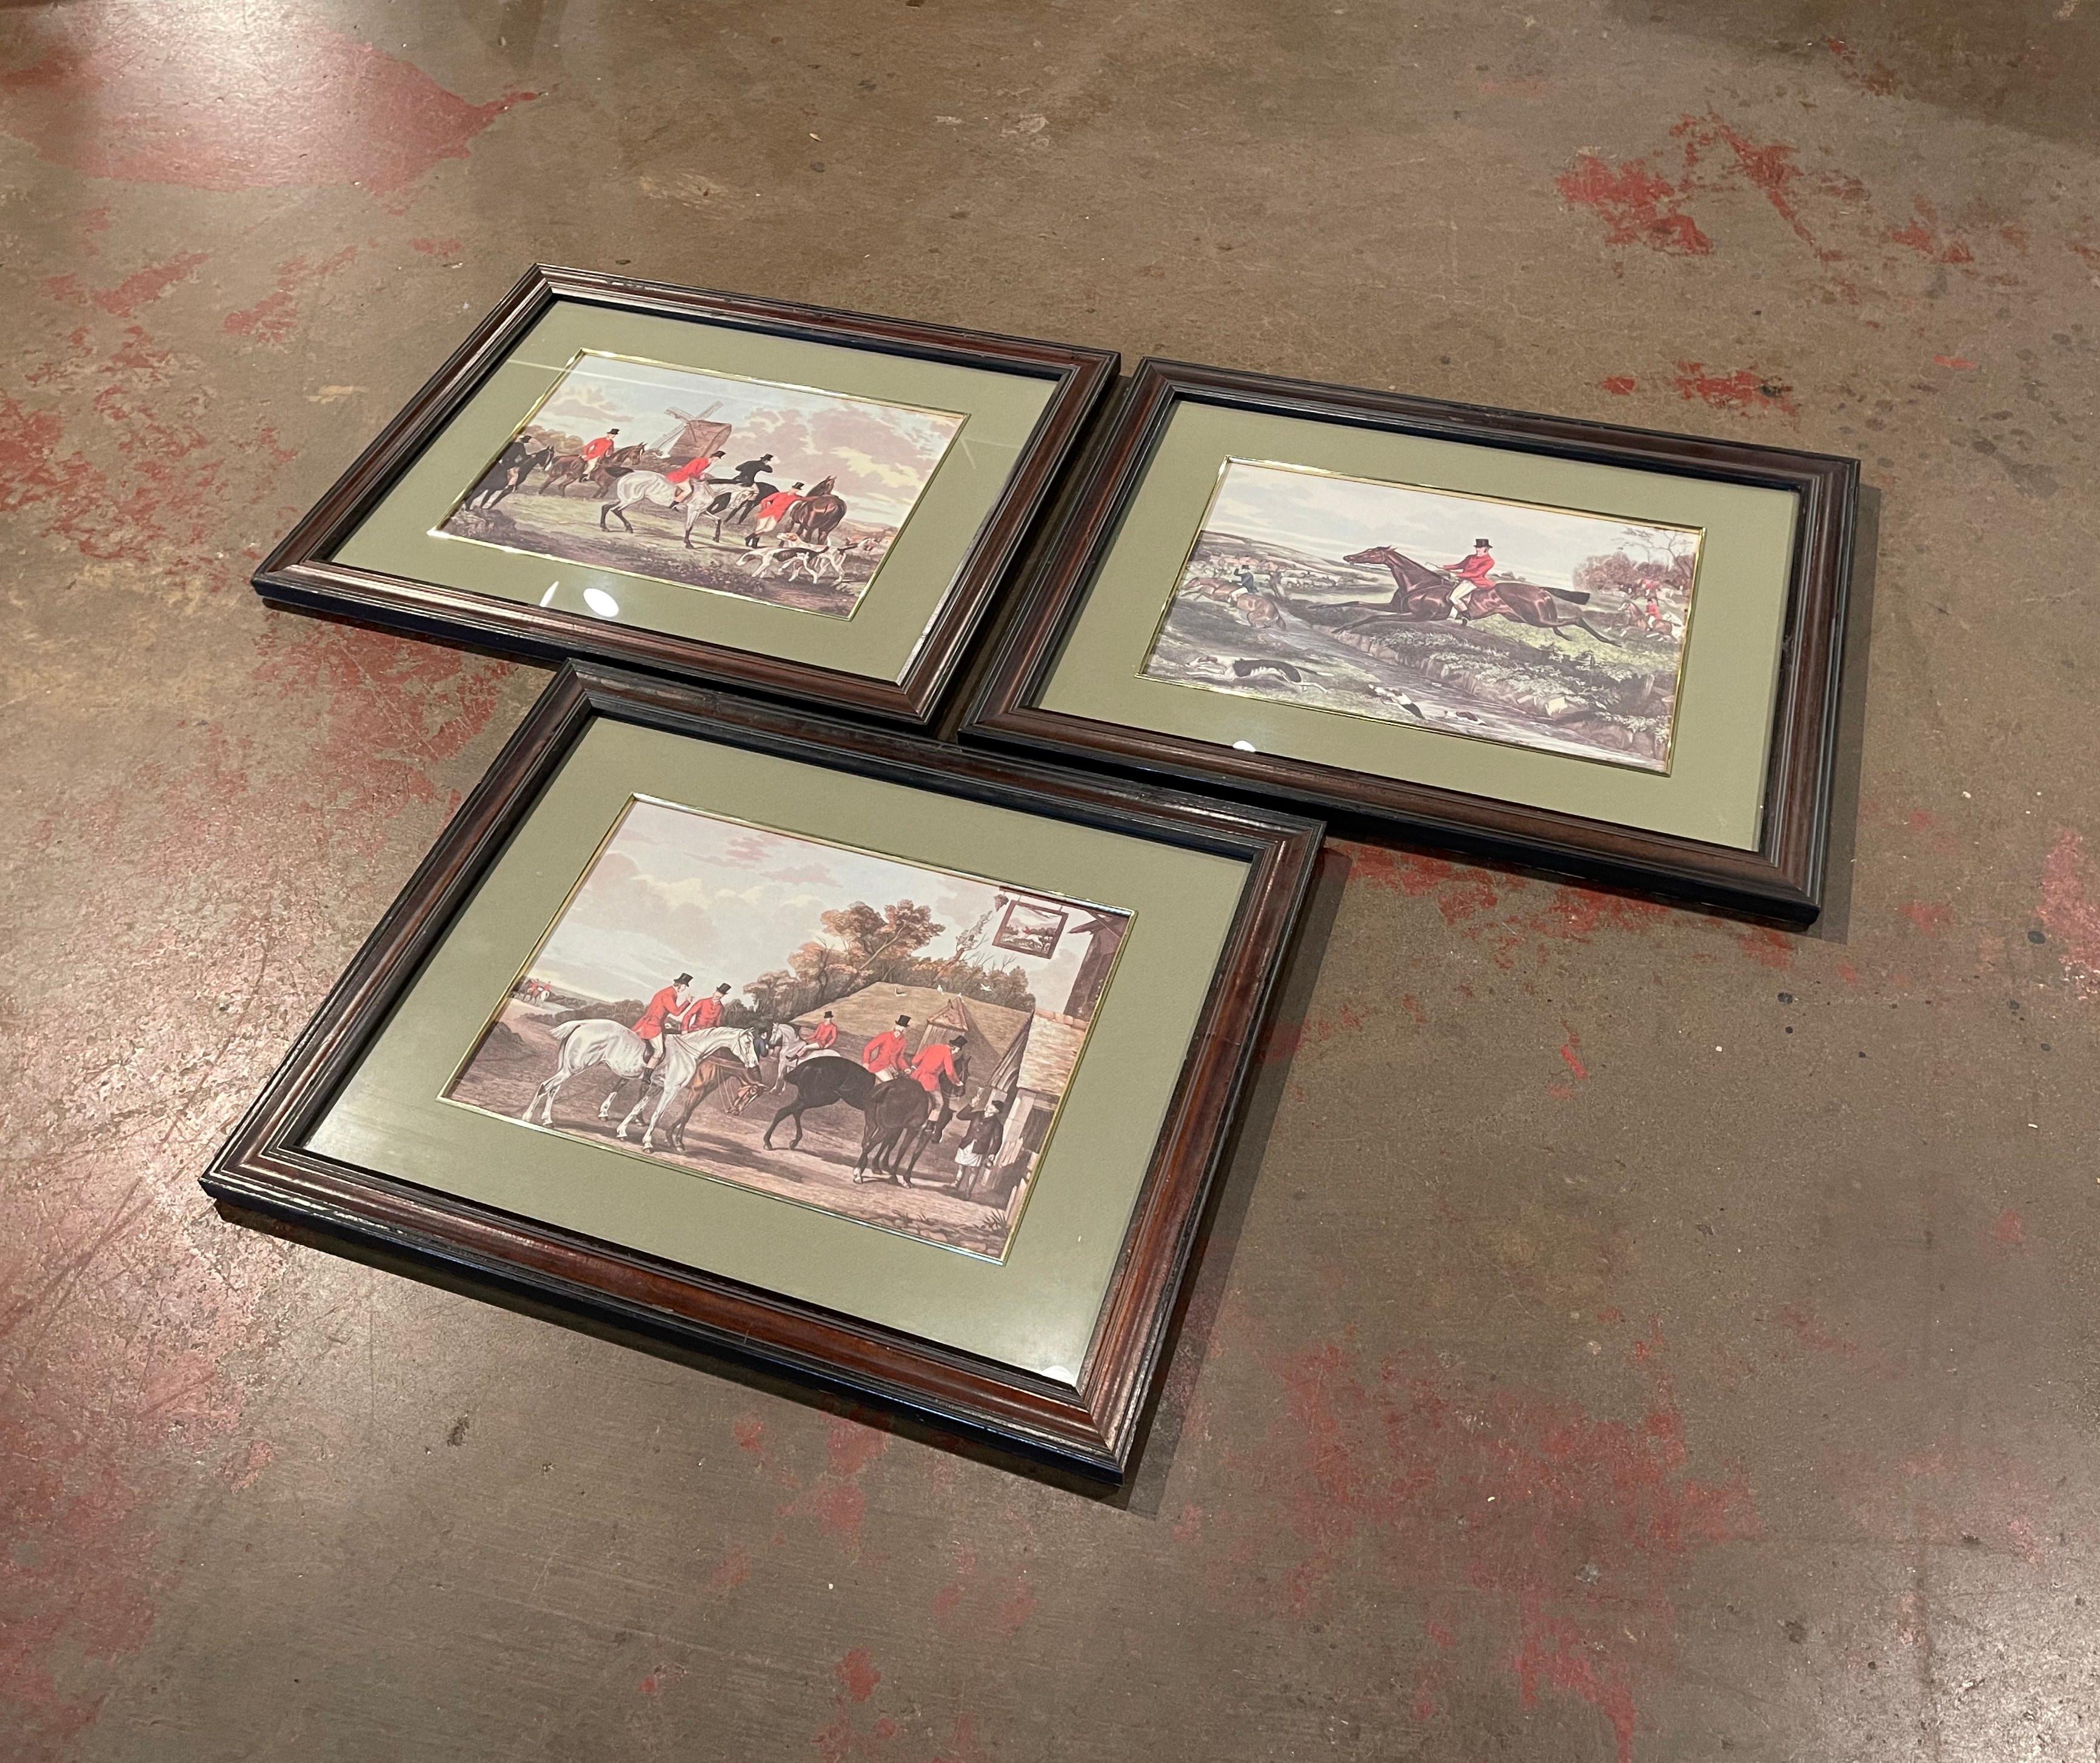 Decorate a ranch or a hunting lodge with these elegant framed antique watercolor prints, featuring riders in brilliant red hunting jackets and stately top hats astride beautifully groomed horses and accompanied by athletic speckled dogs. Crafted in